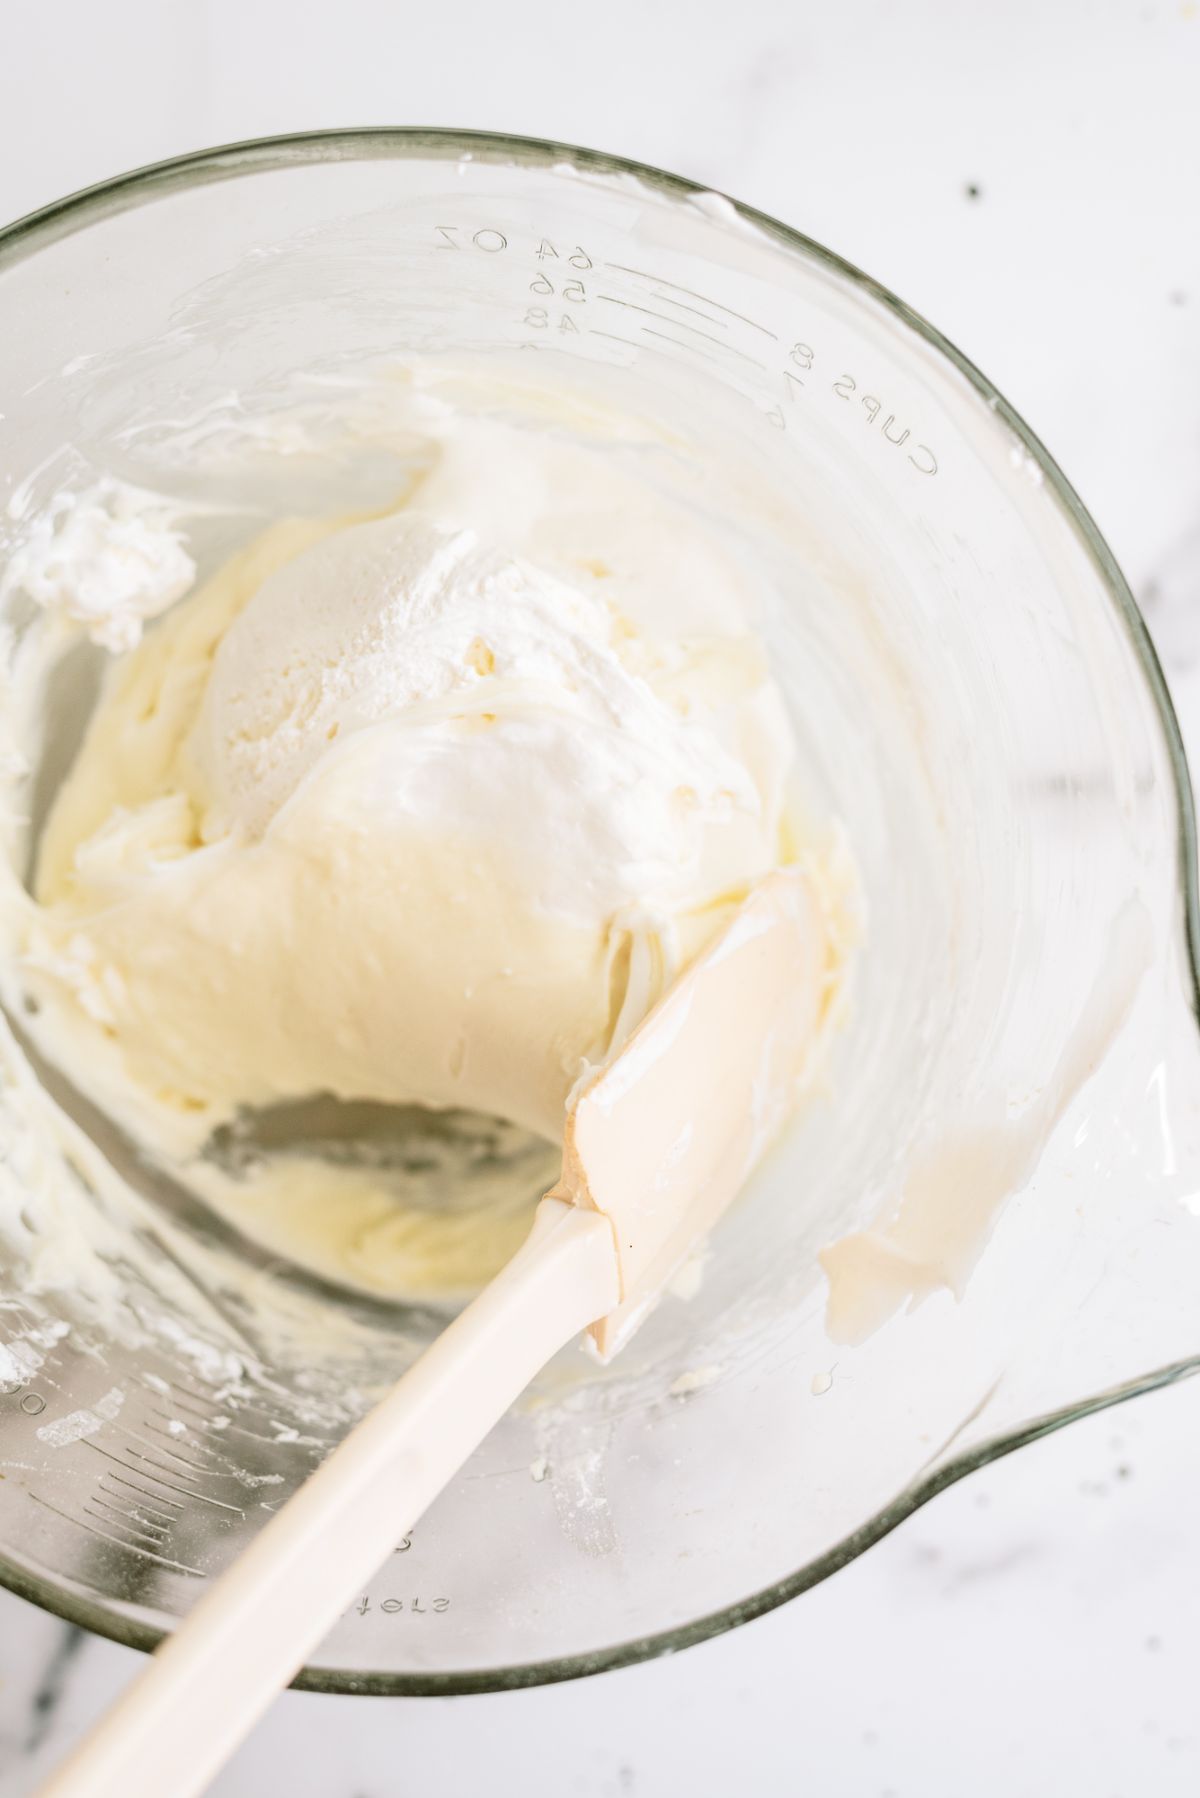 Folding whip cream into the cream cheese layer ingredients in a bowl